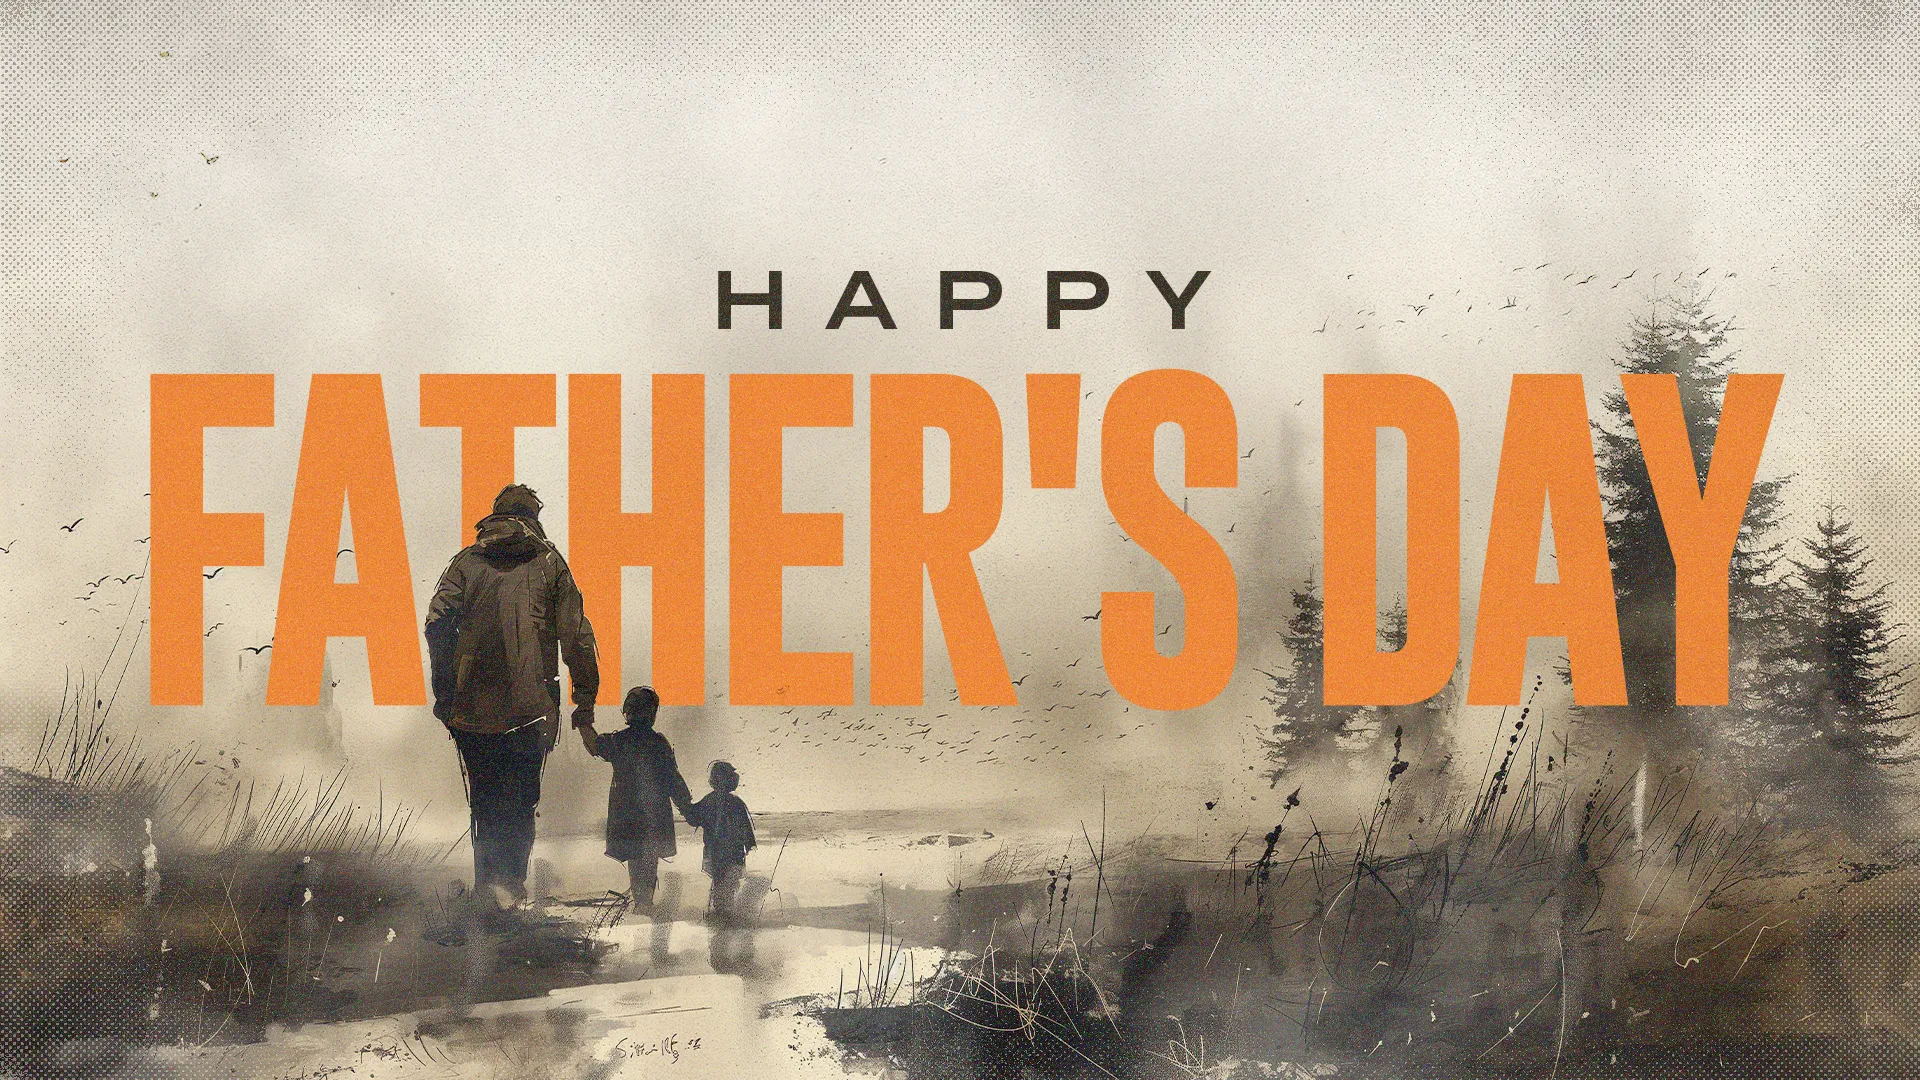 This Evocative Father'S Day Graphic, With Its Stirring Depiction Of A Father And Child In A Serene Landscape, Beautifully Captures The Guiding And Protective Role Of Fathers, Making It An Ideal Visual For Your Church'S Celebration Of Father'S Day.